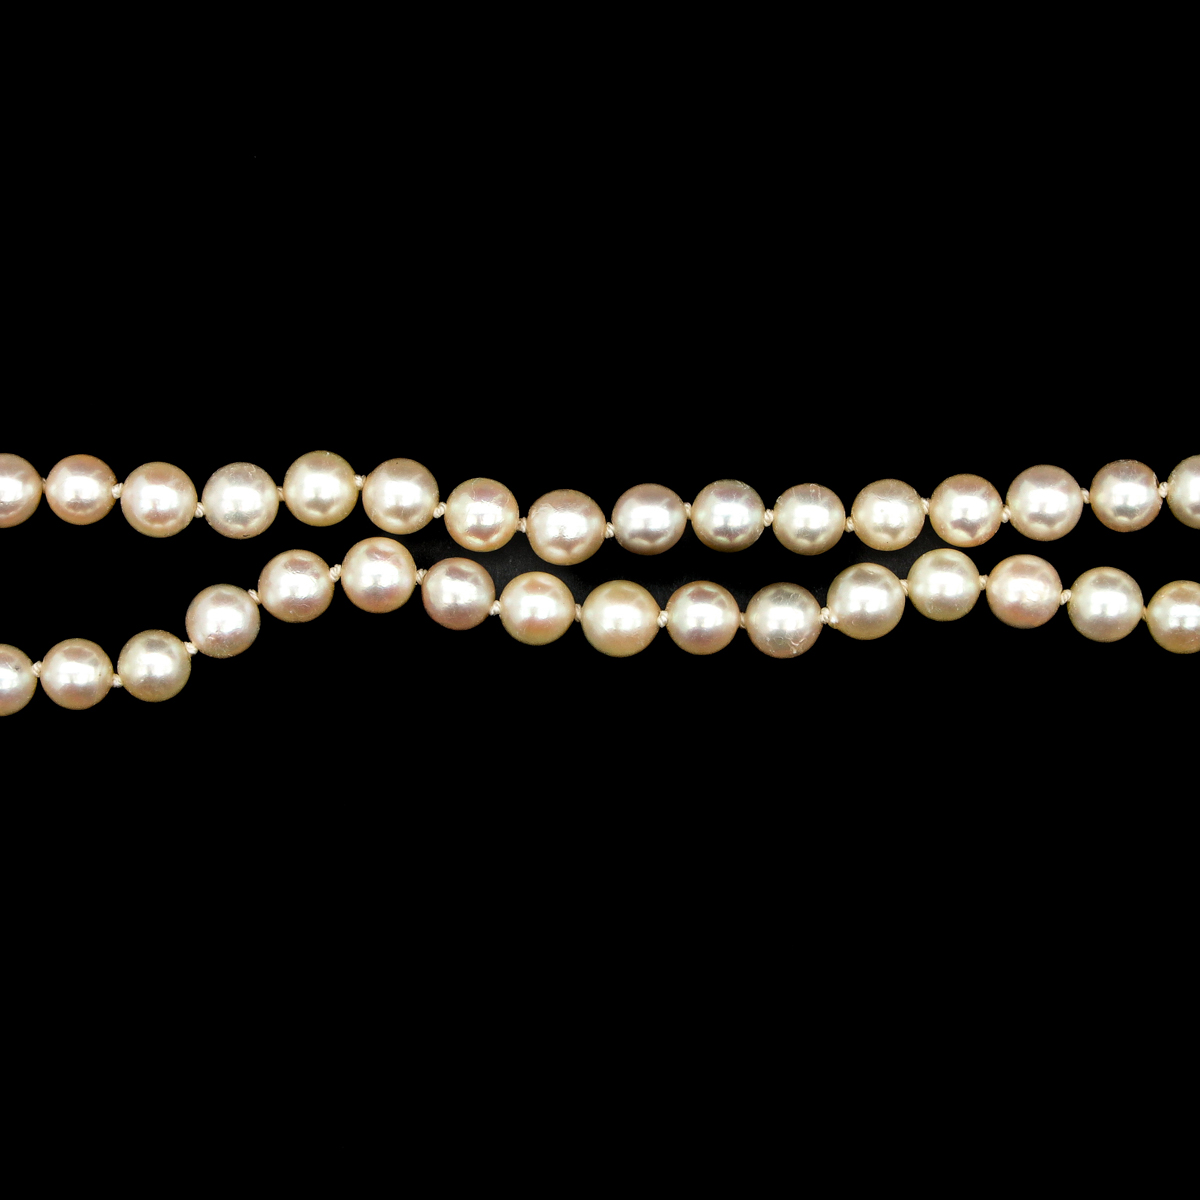 A Collection of 4 Pearl Necklaces - Image 7 of 10